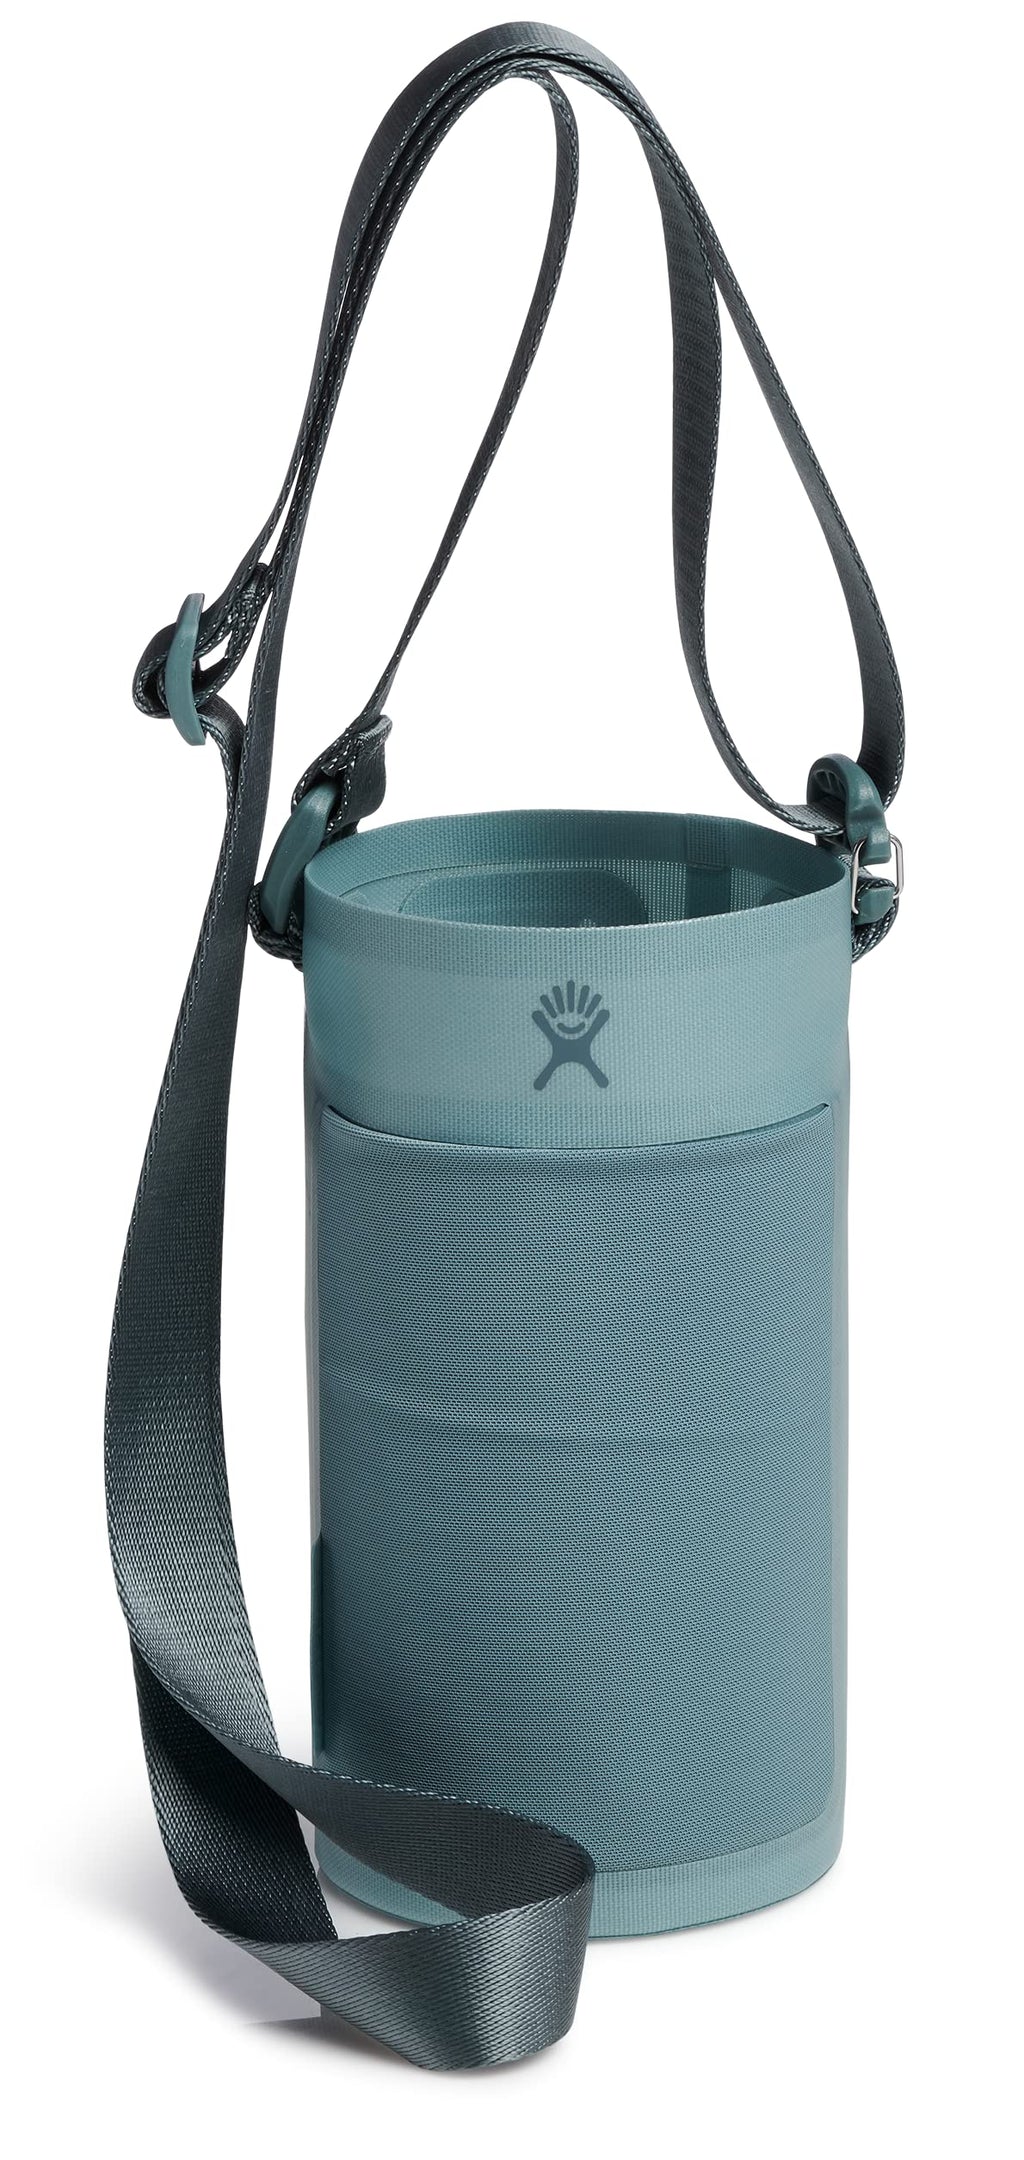 Hydro Flask Accessory Tag Along Bottle Sling - Reusable Water Bottle Carrier Holder Strap Purse Bag for Hydro Flask - Adjustable, BPA-Free, Non-Toxic Medium Baltic - BeesActive Australia